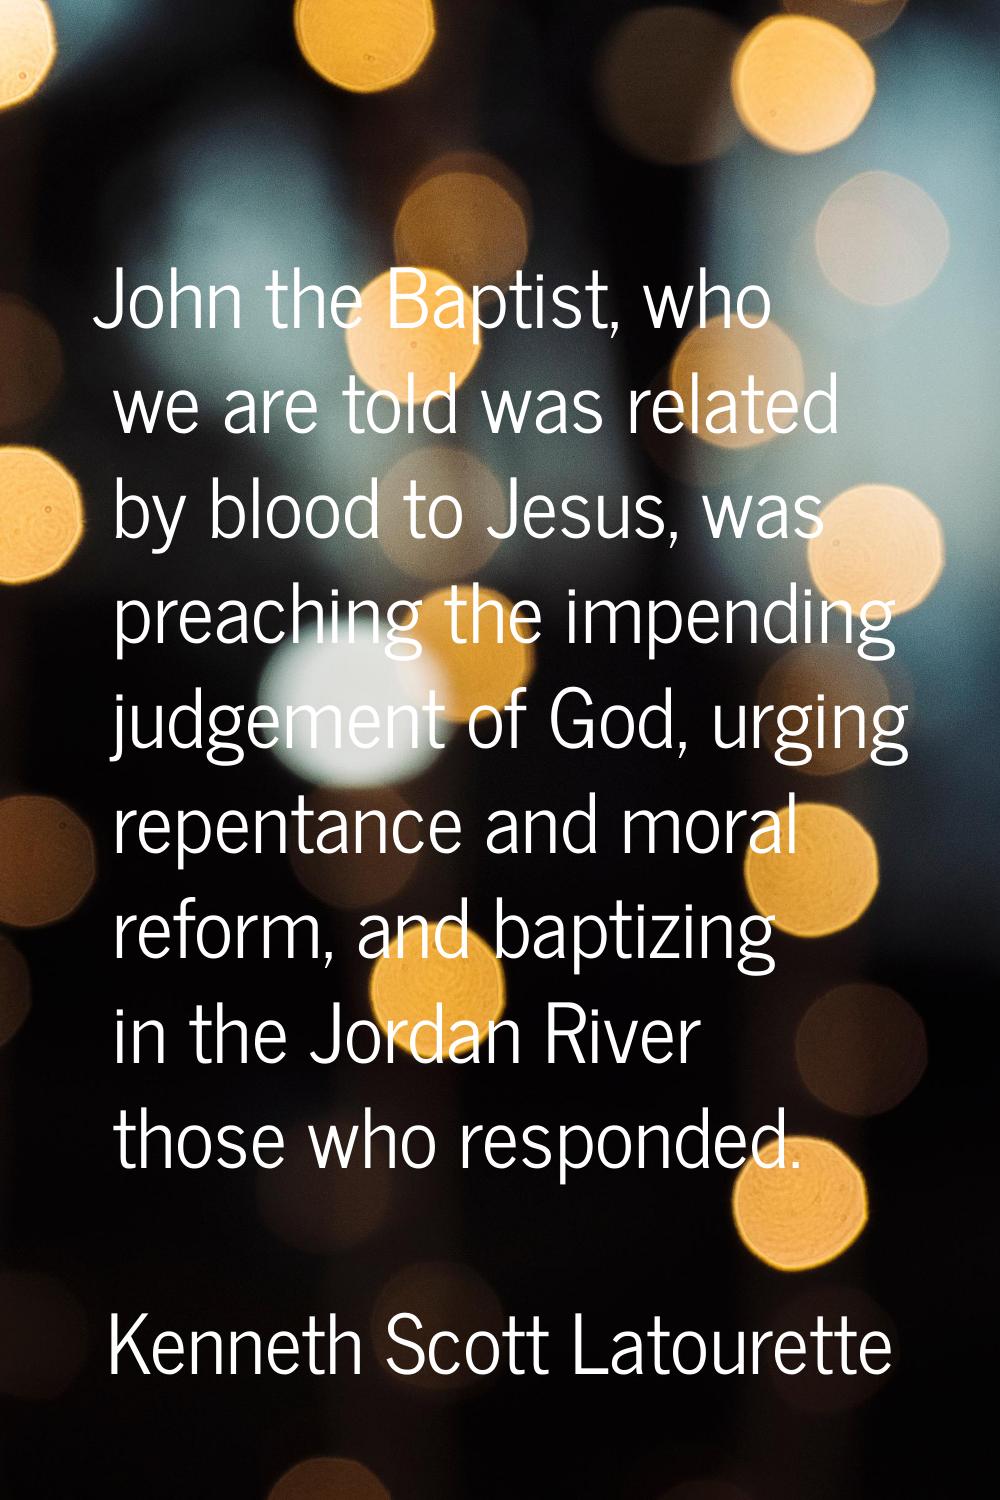 John the Baptist, who we are told was related by blood to Jesus, was preaching the impending judgem